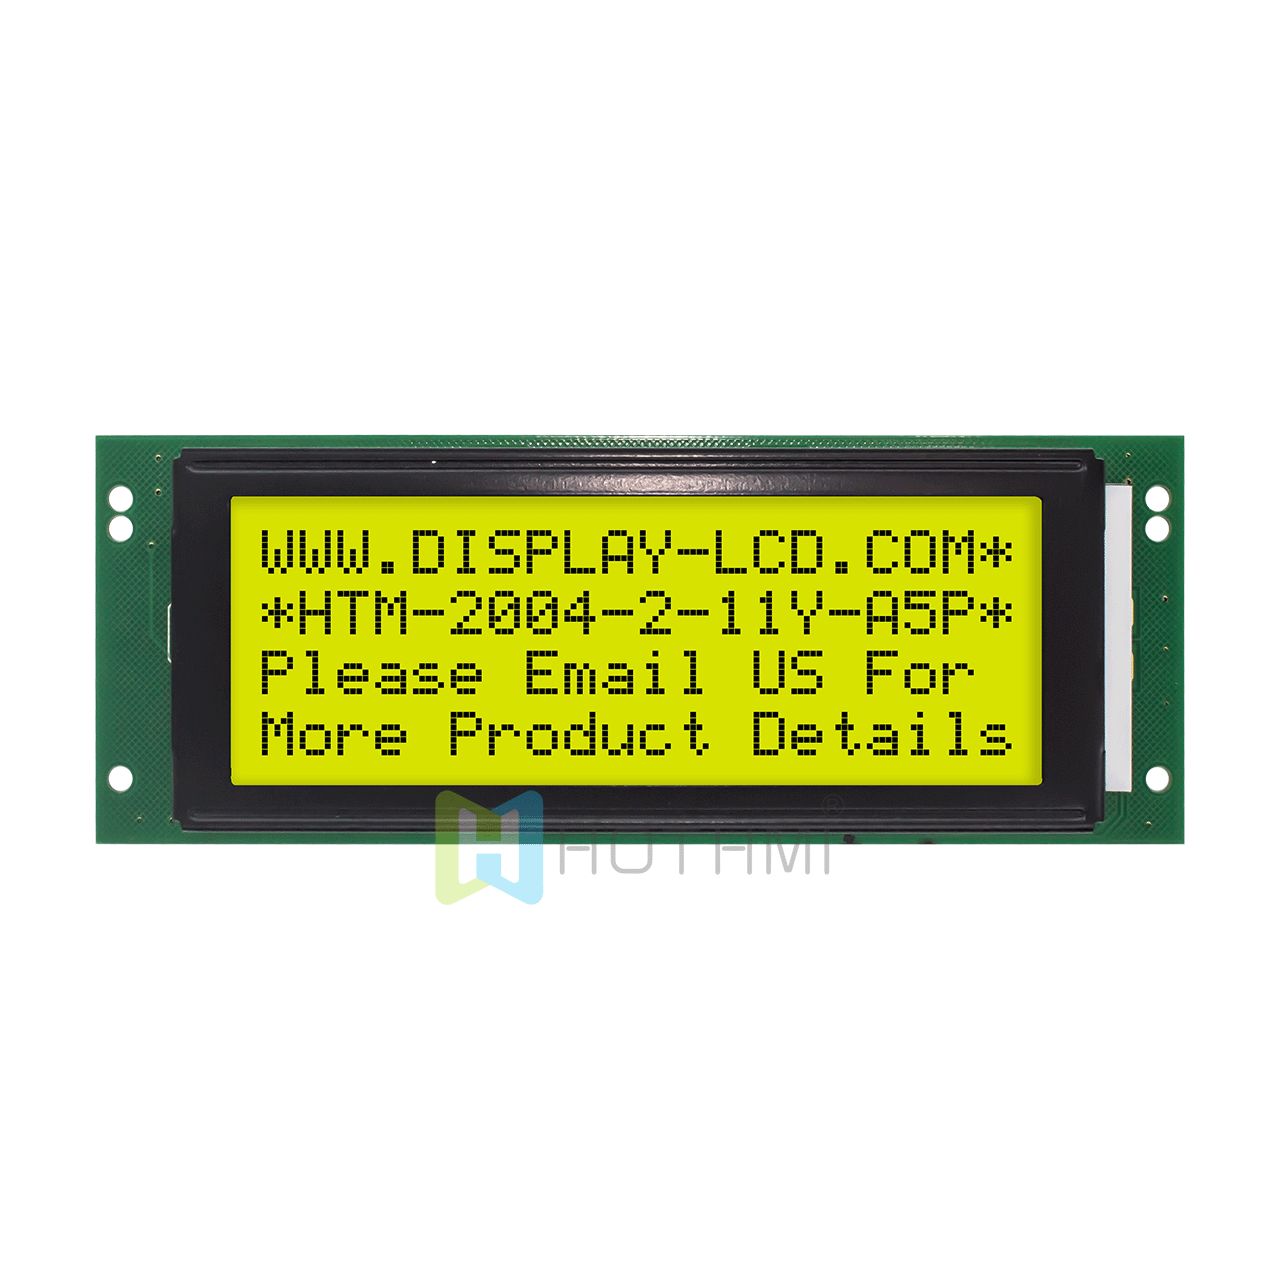 4X20 monochrome character LCD display / STN+ gray display / with yellow-green backlight / Arduino display / transflective LCD display / 5.0v